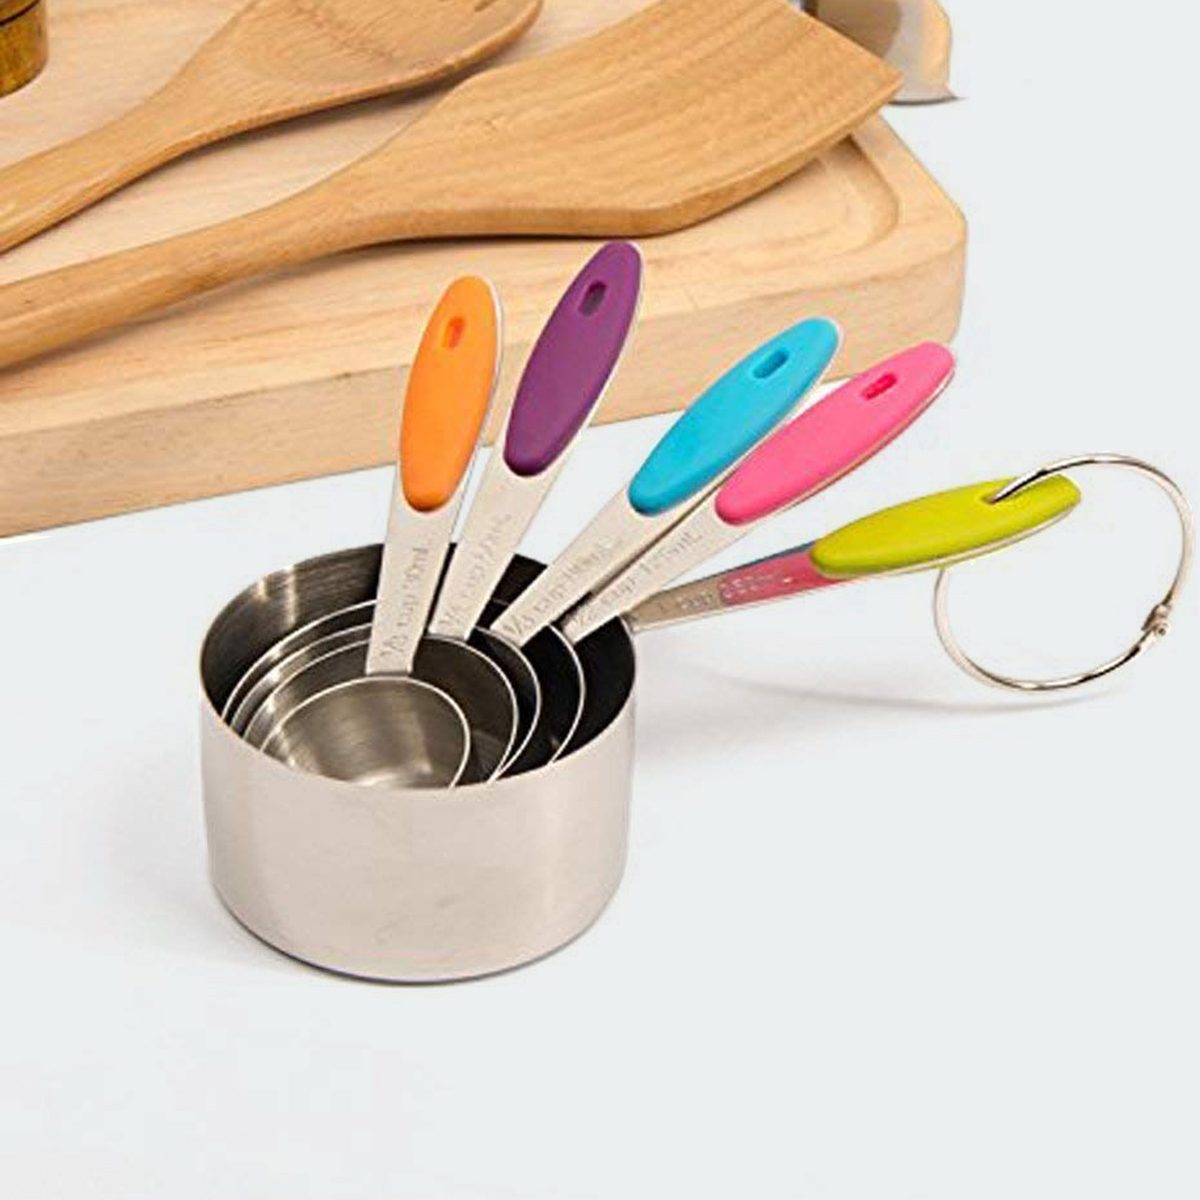 Stainless Steel Measuring Cups And Measuring Spoons 10-Piece Set, 5 Cups  And 5 Spoons